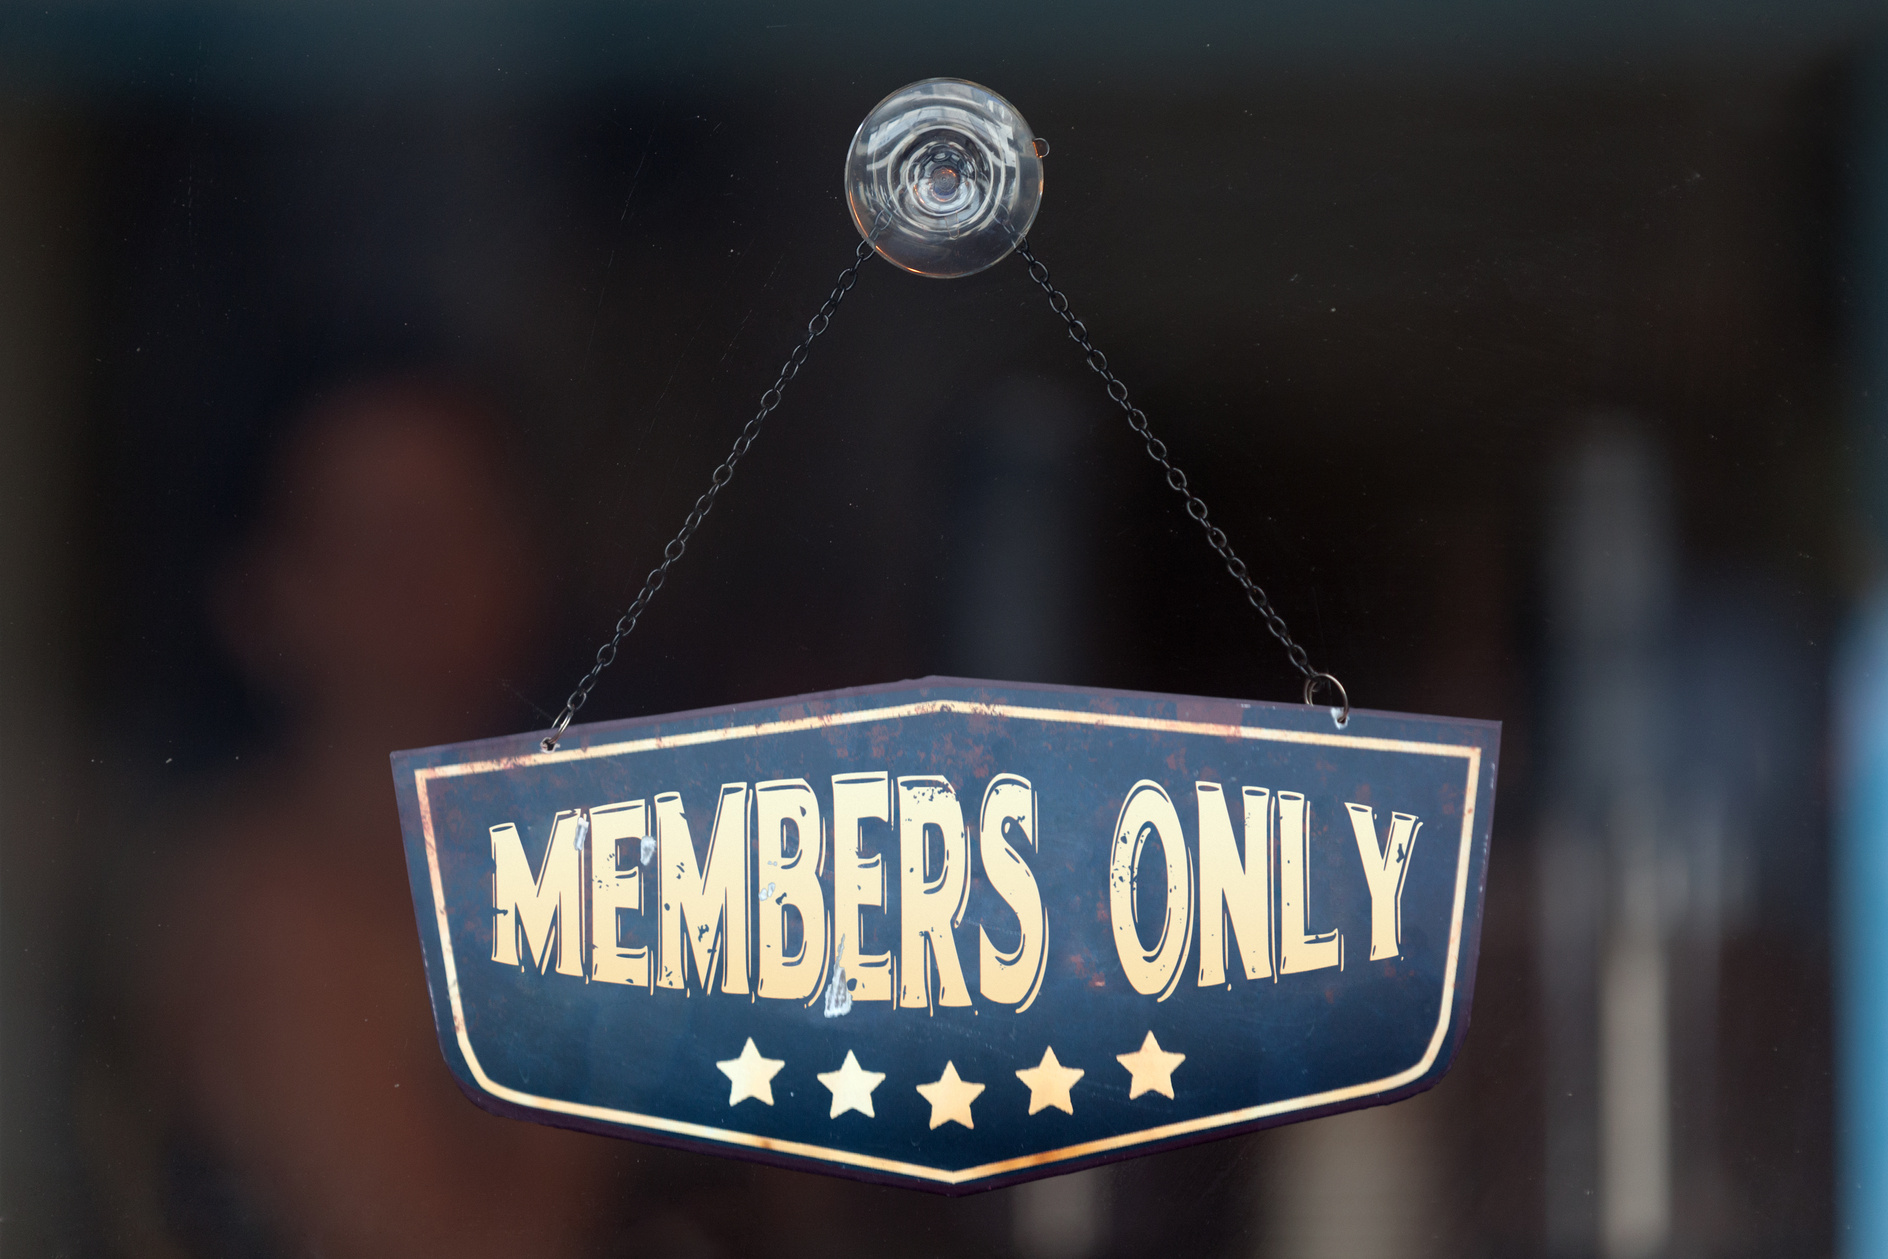 Members only sign